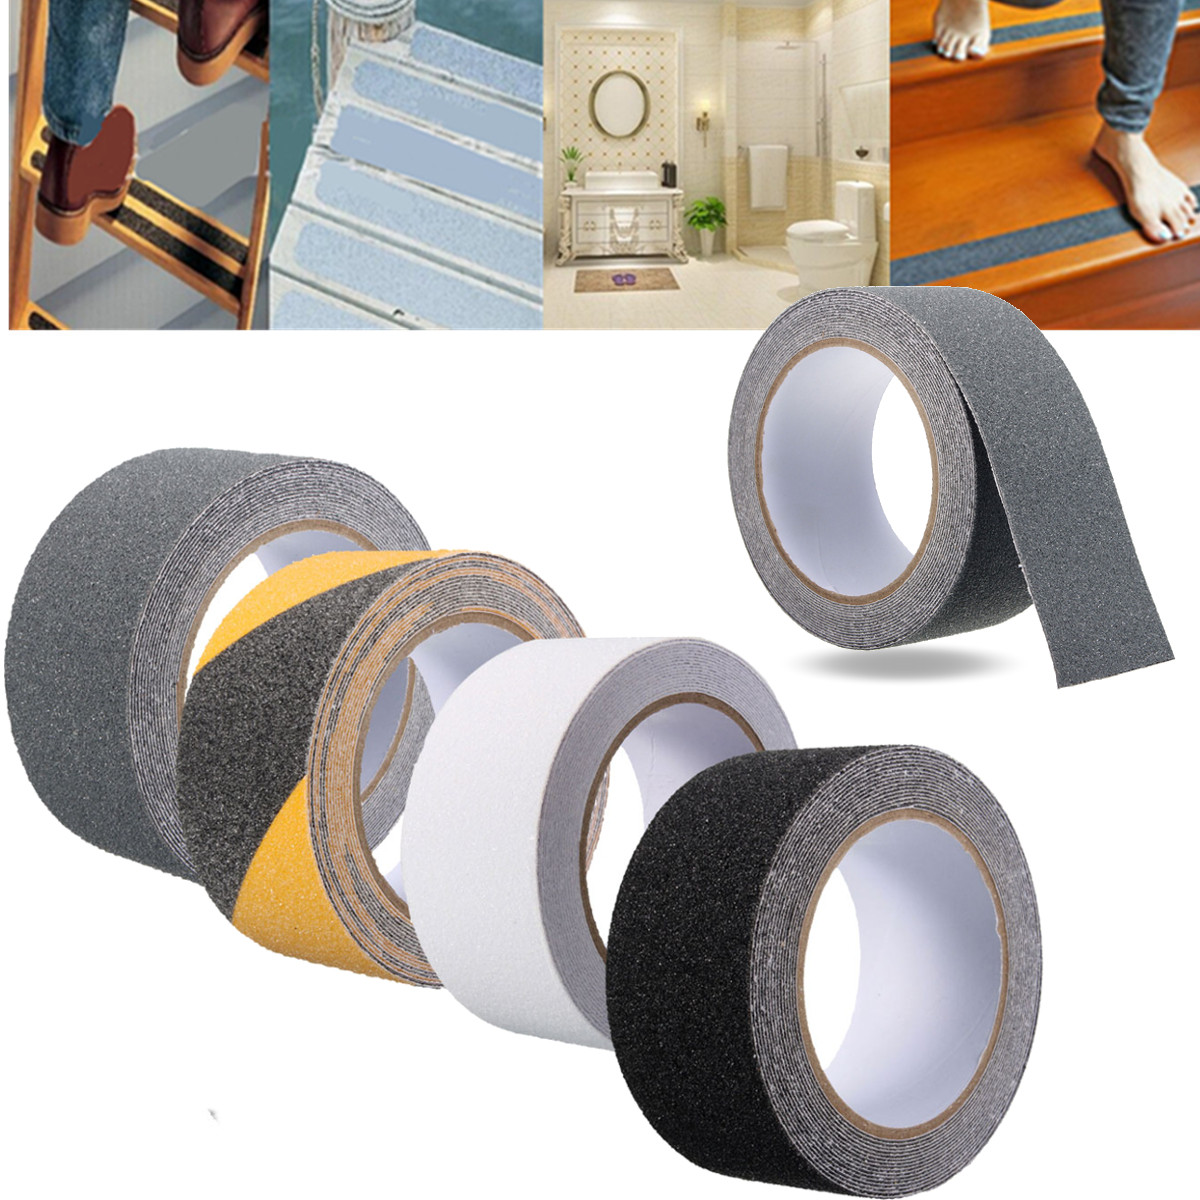 5CM-x-5M-Non-Slip-In-The-Dark-Tape-Anti-Slip-Adhesive-Grip-for-Stairs-and-Gaffers-165-Feet-Long-1382967-1